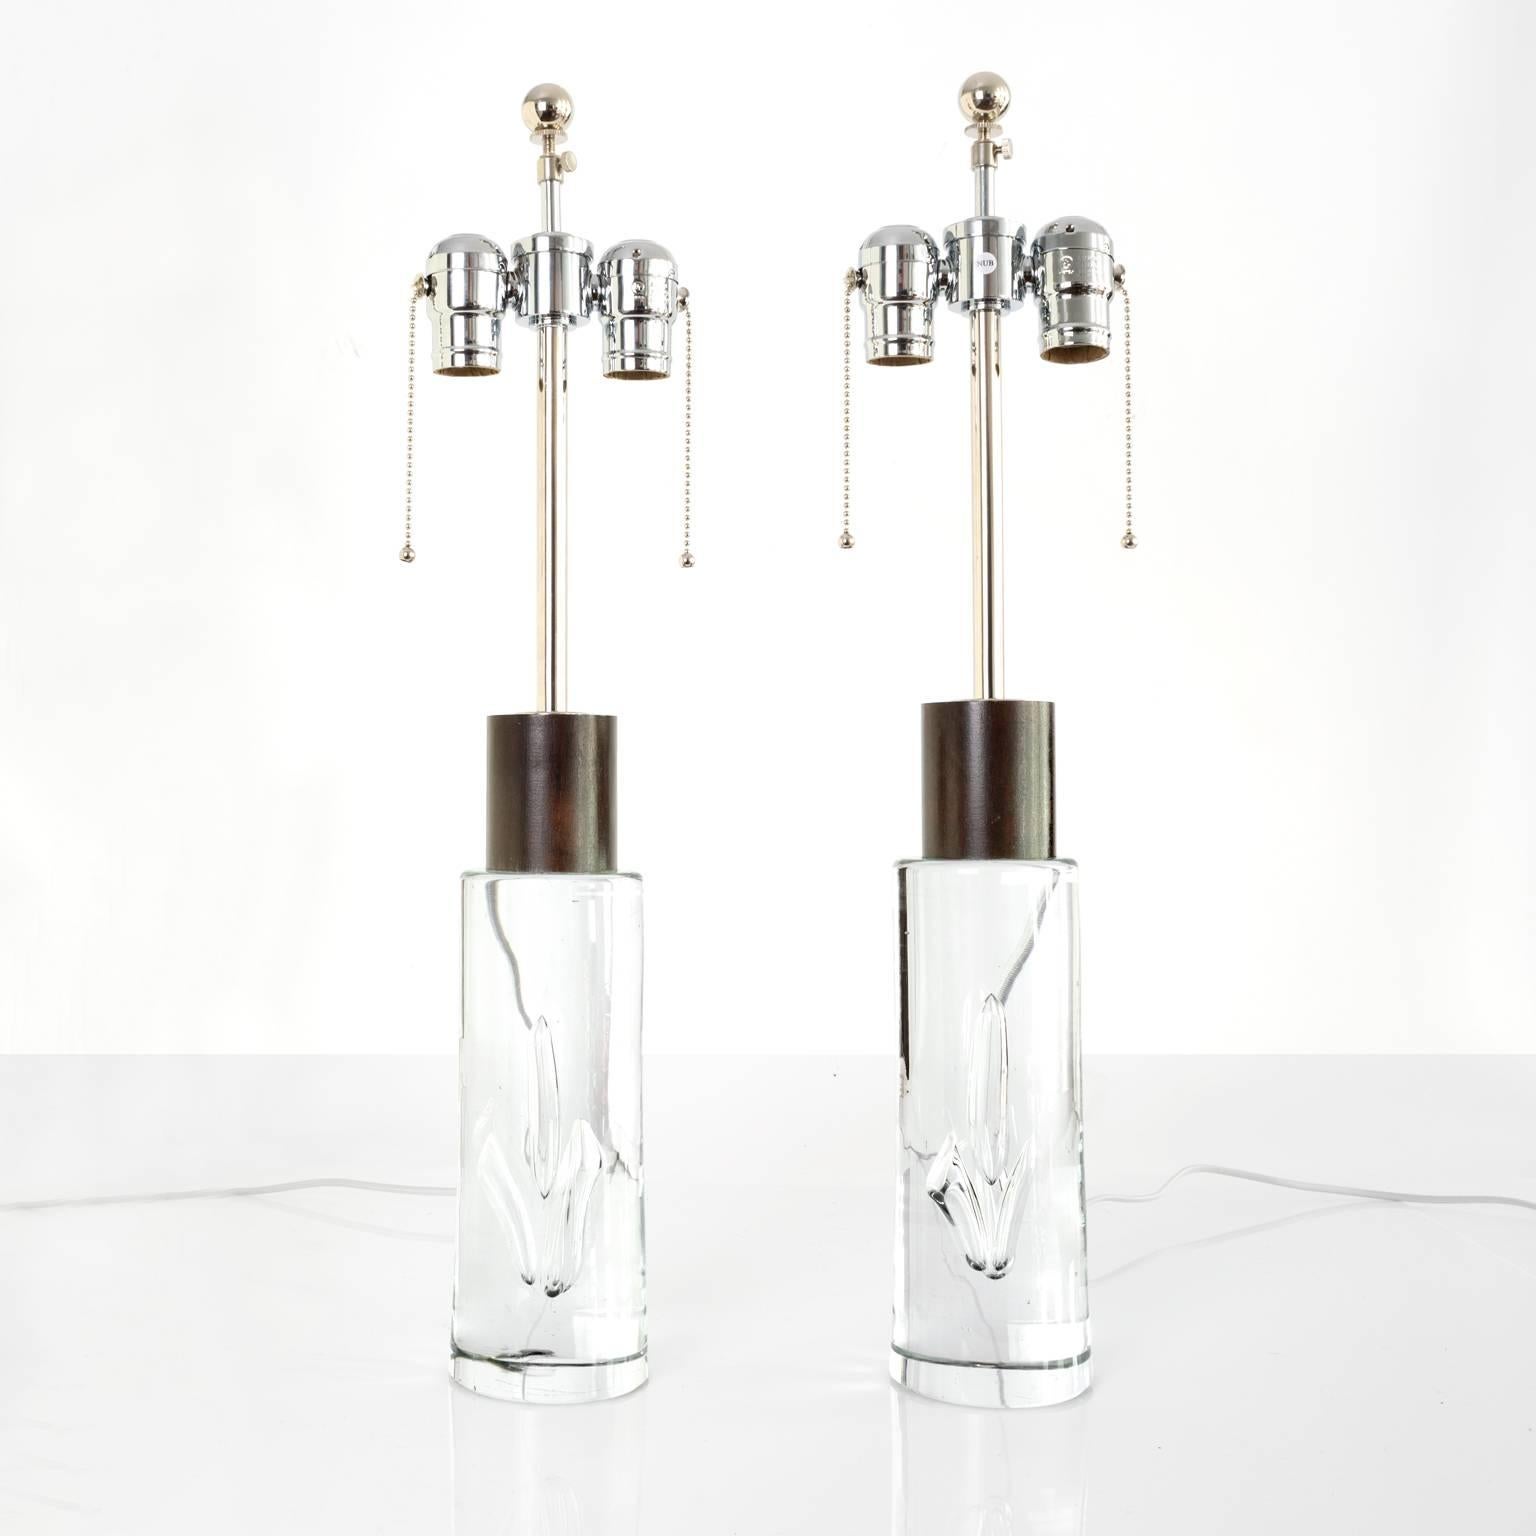 Scandinavian Modern Pair of Vicke Lindstrand Designed Solid Glass Table Lamps with Mahogany Details